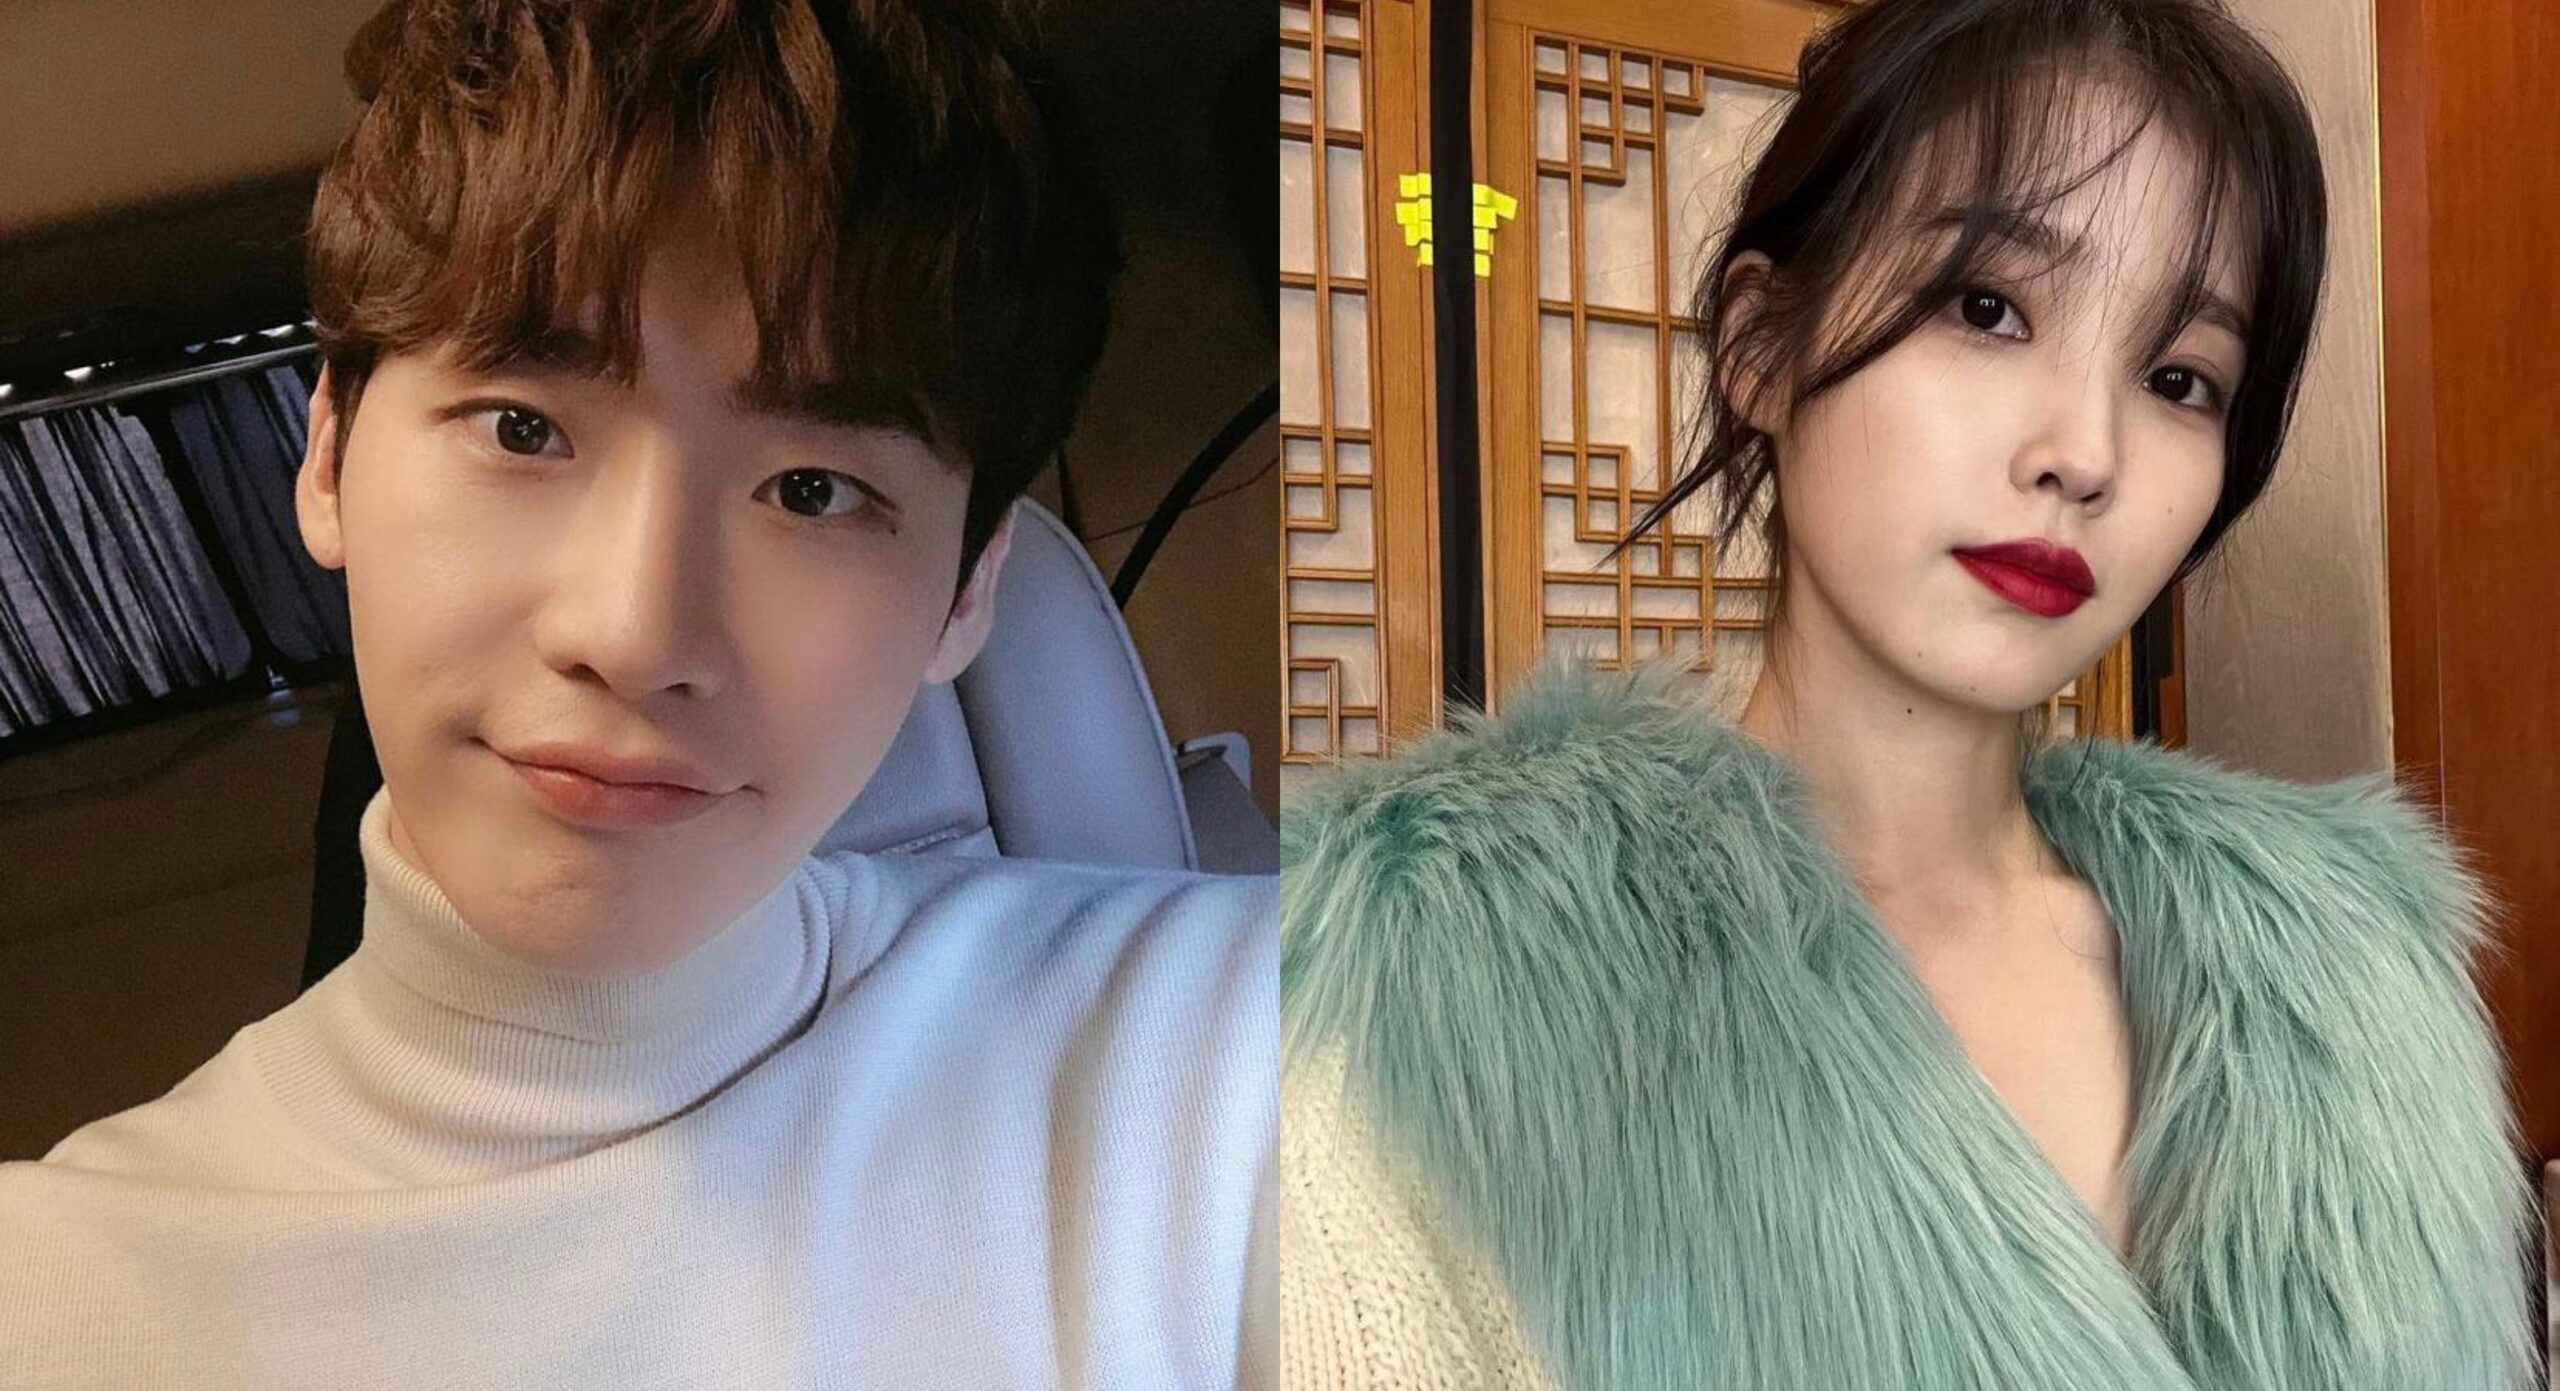 Confirmed! Lee Jong-suk and IU are dating